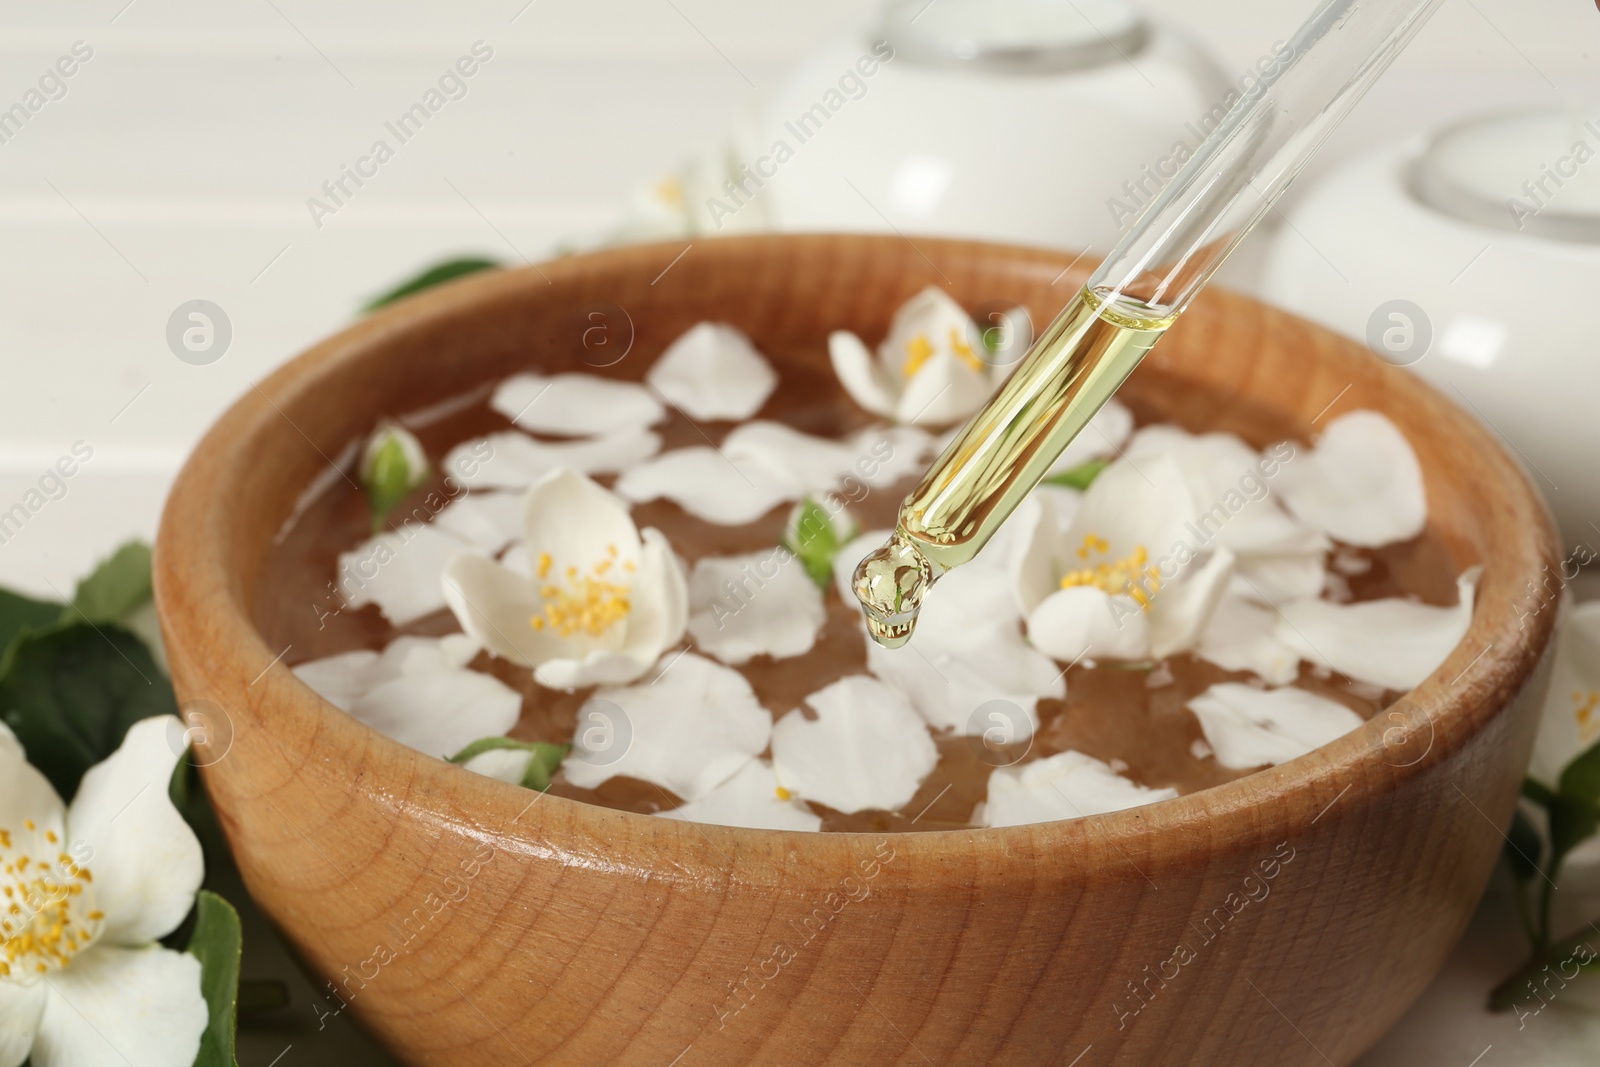 Photo of Dripping jasmine essential oil into bowl with petals on table, closeup